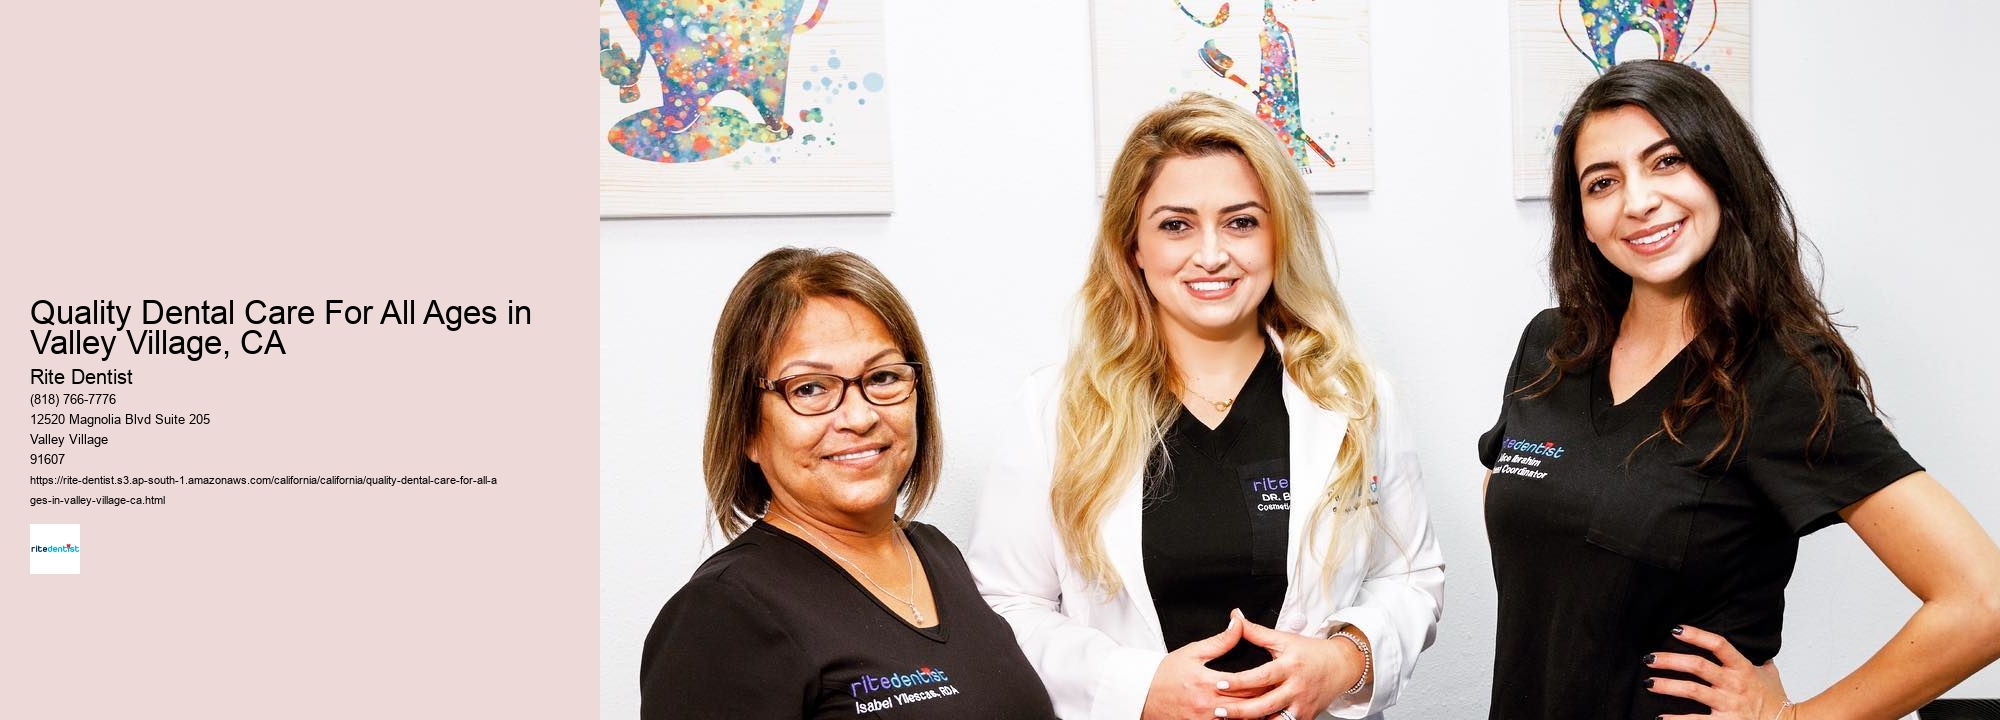 Quality Dental Care For All Ages in Valley Village, CA